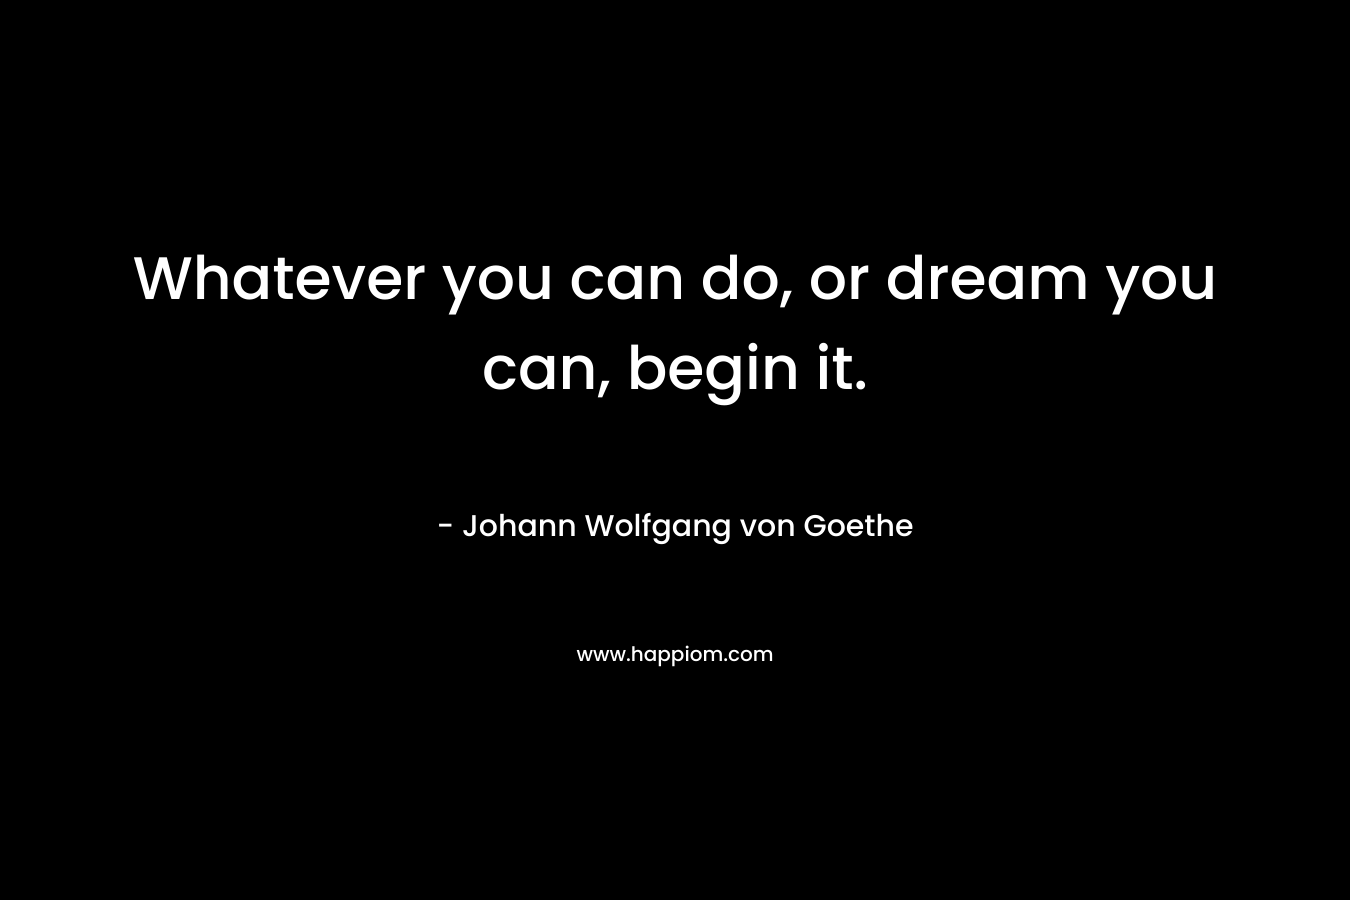 Whatever you can do, or dream you can, begin it.